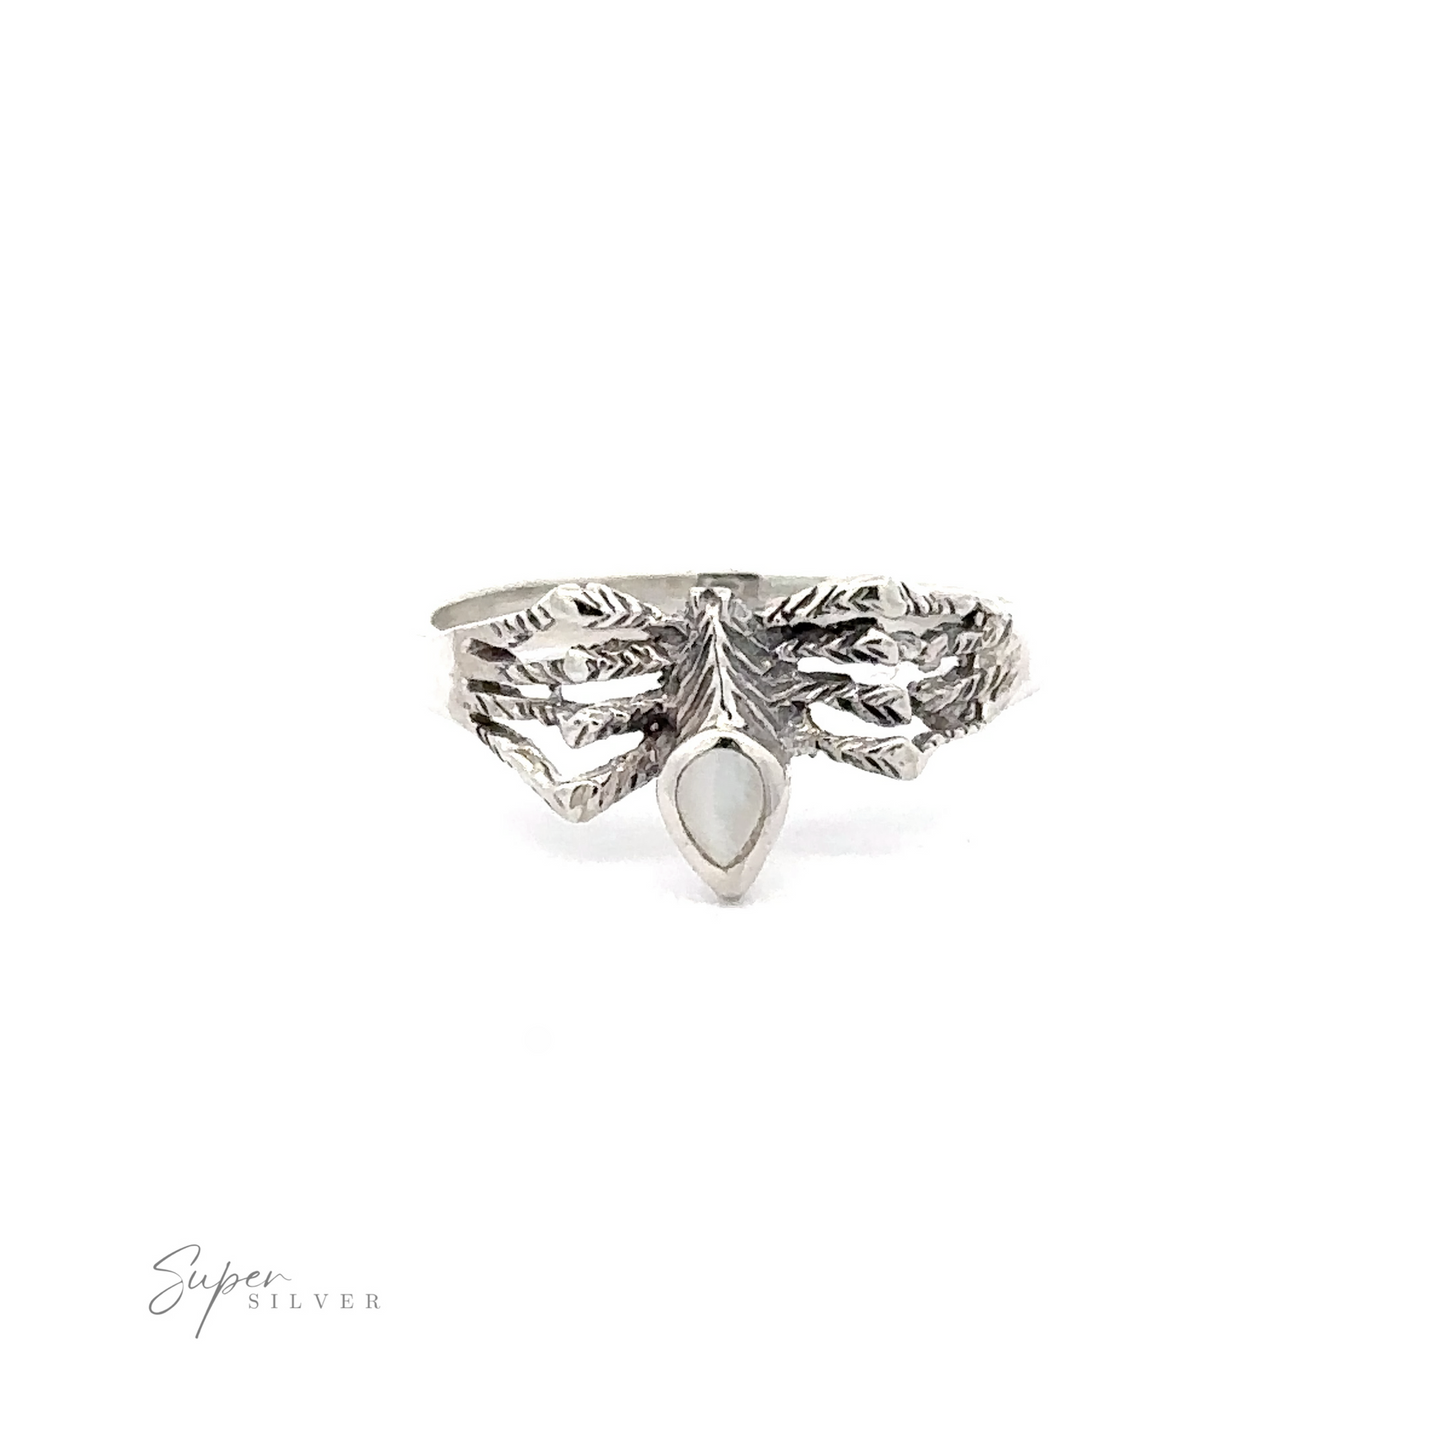 
                  
                    A Small Inlay Spider Ring with a leafy design features a single, teardrop-shaped white gemstone in the center. The brand name "Super Silver" appears in the bottom left corner. This piece of mystical jewelry is perfect for those seeking elegance and enchantment.
                  
                